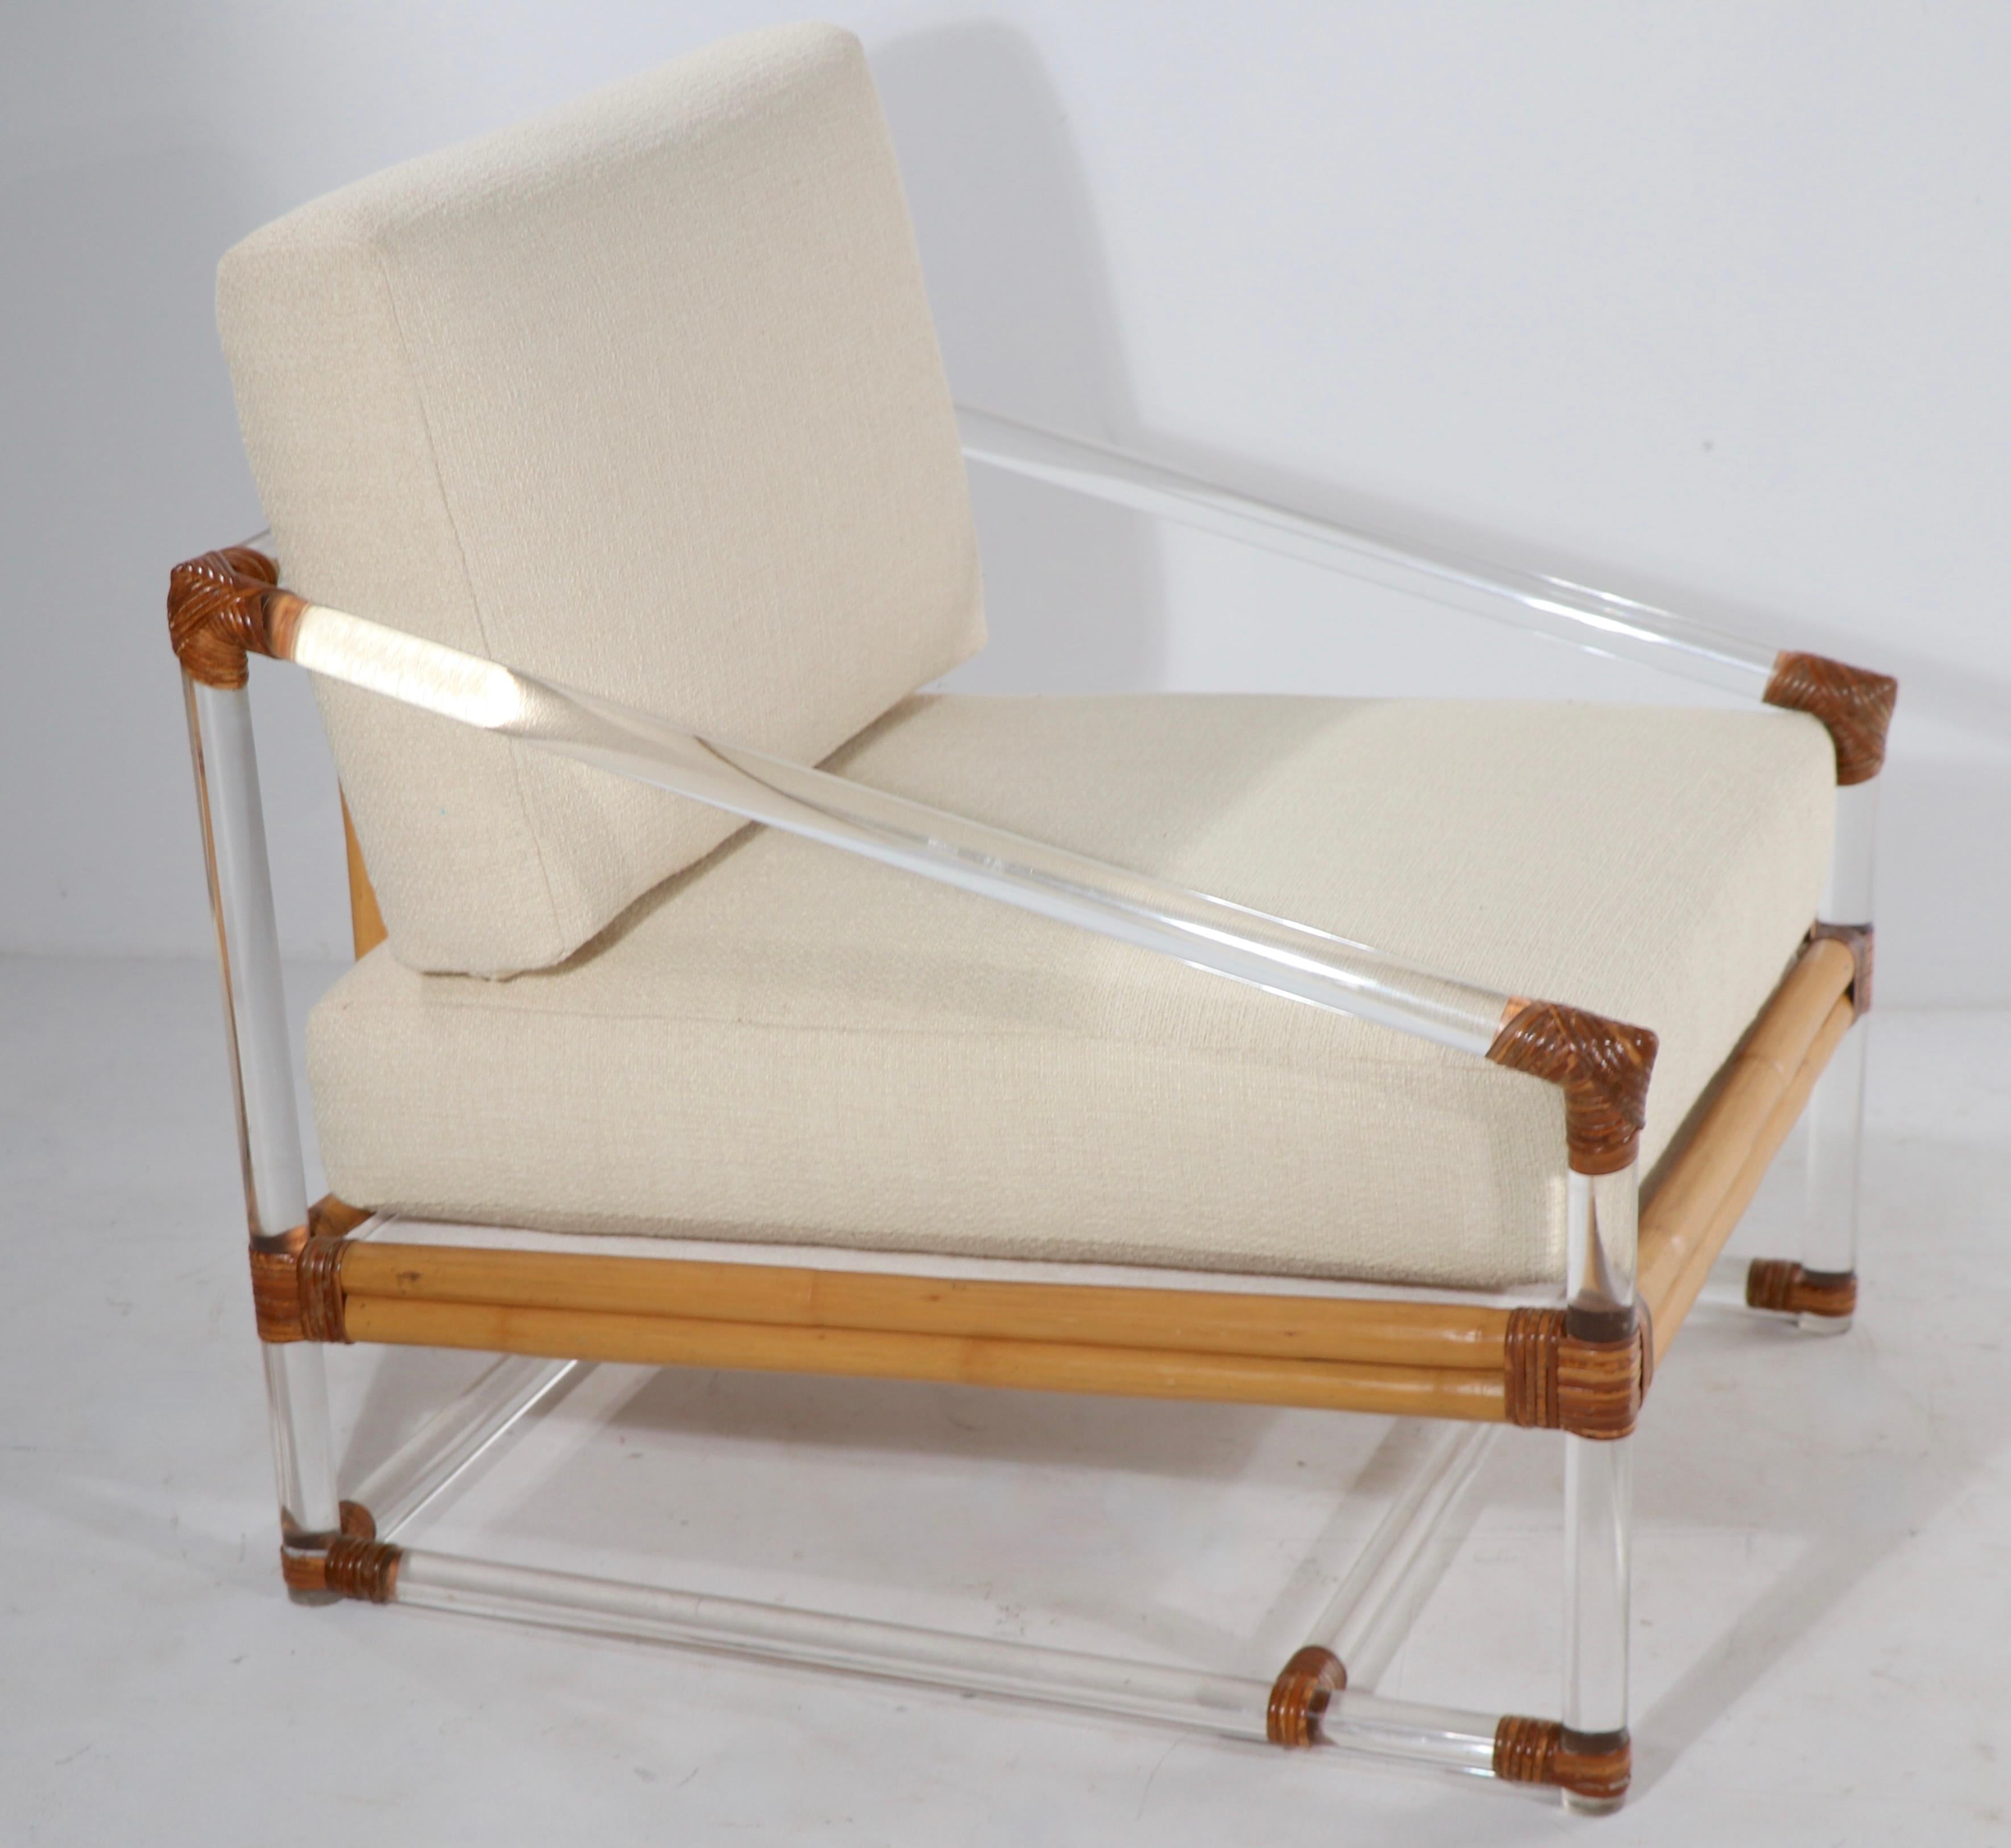 Exceptional lucite, wicker and upholstered lounge chair by McGuire. This example is in excellent condition, the cushions have been reupholstered - the lucite frame is in very good original condition, ready to use.